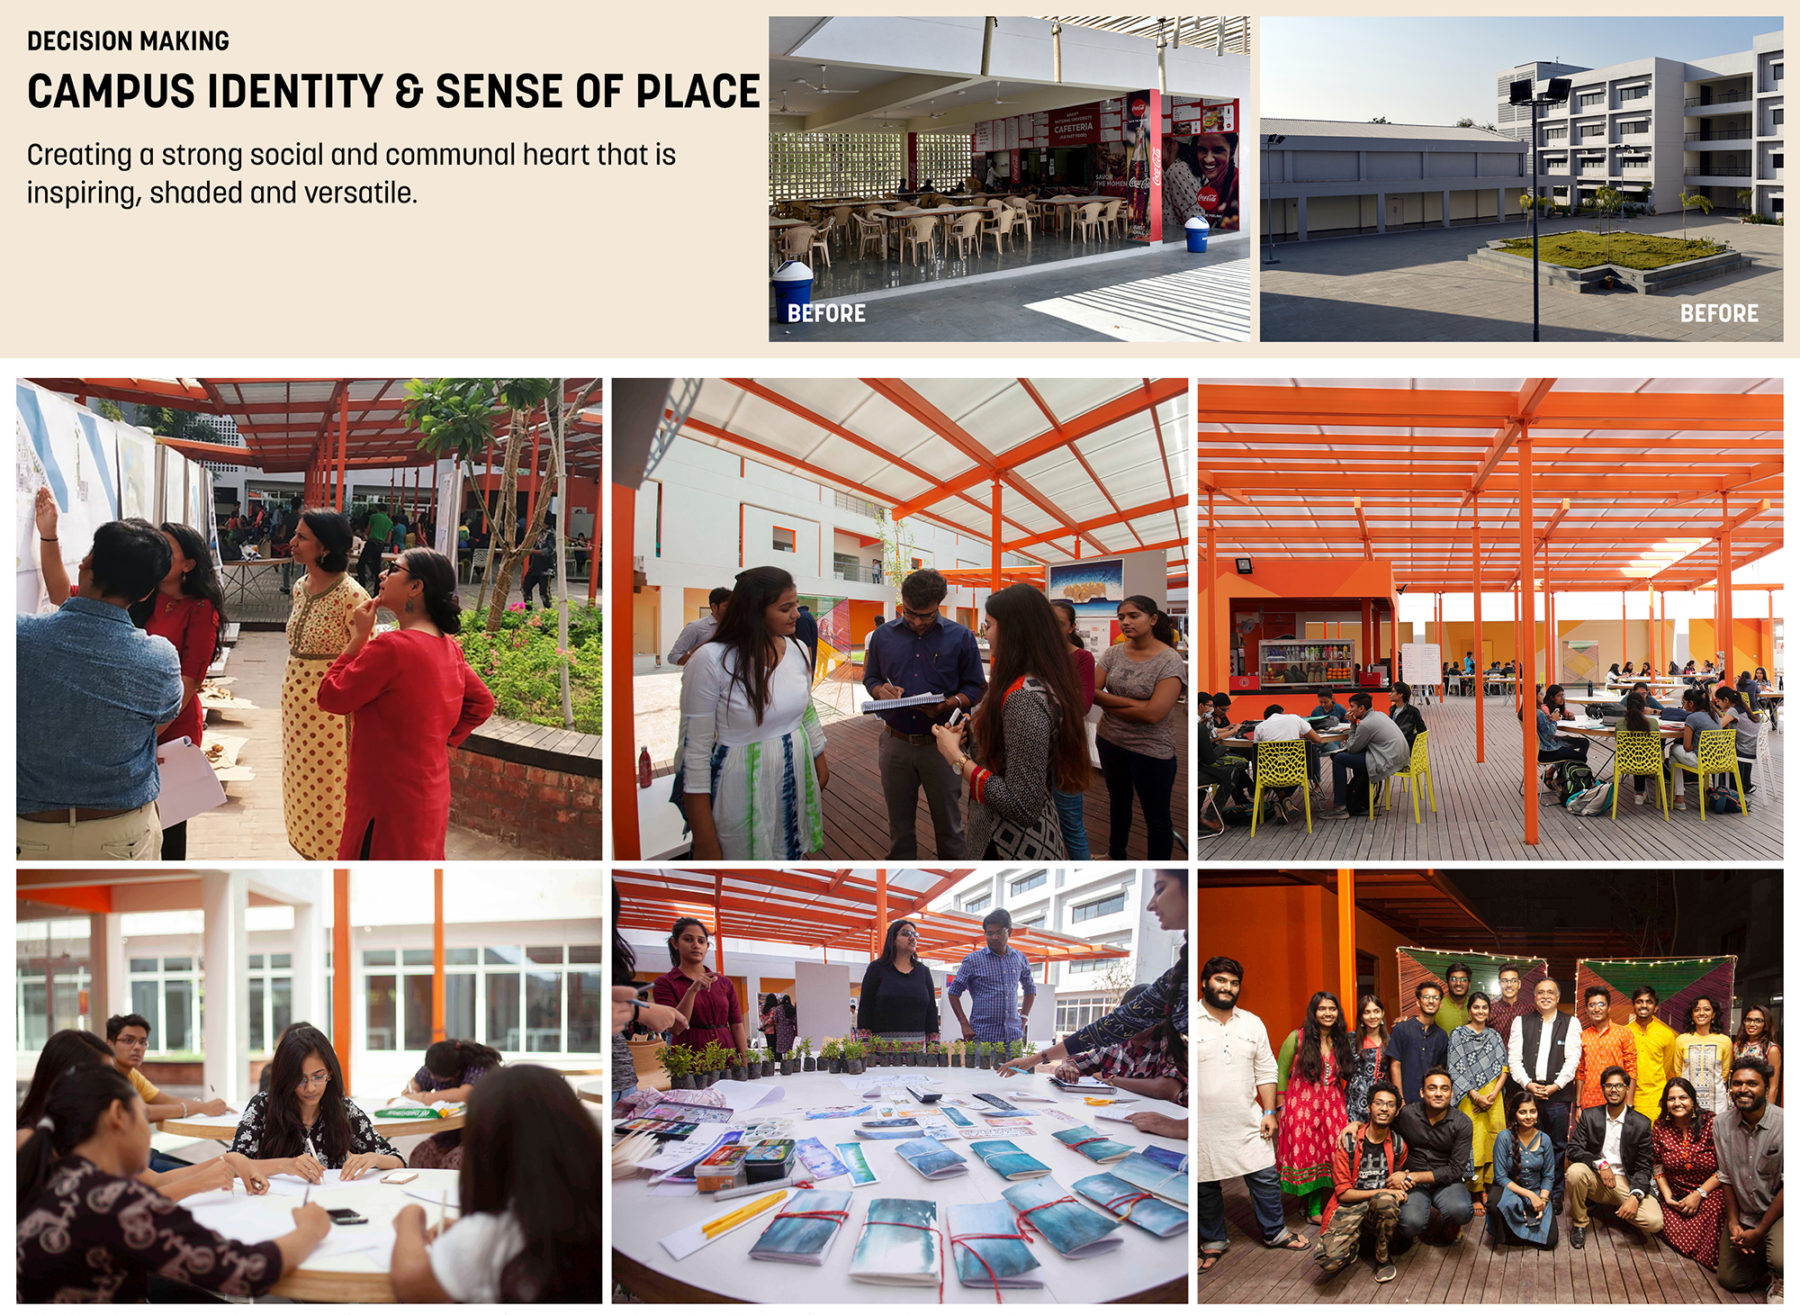 campus identity and sense of place, creating new social heart in courtyard of building